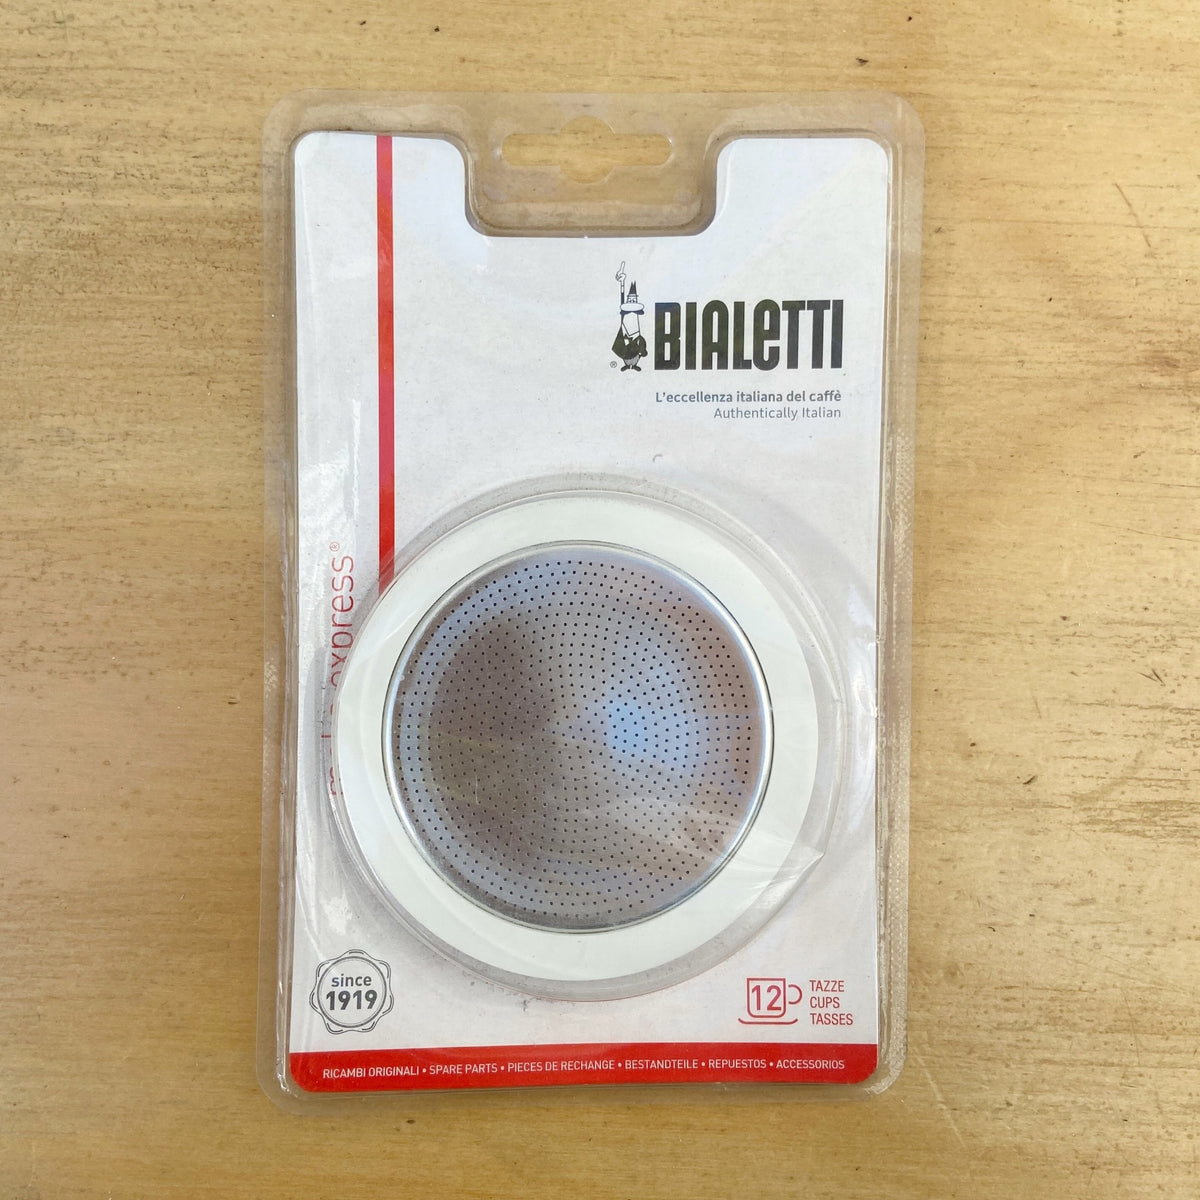 Bialetti Moka Express – 6 Cup Replacement Gasket/Filter